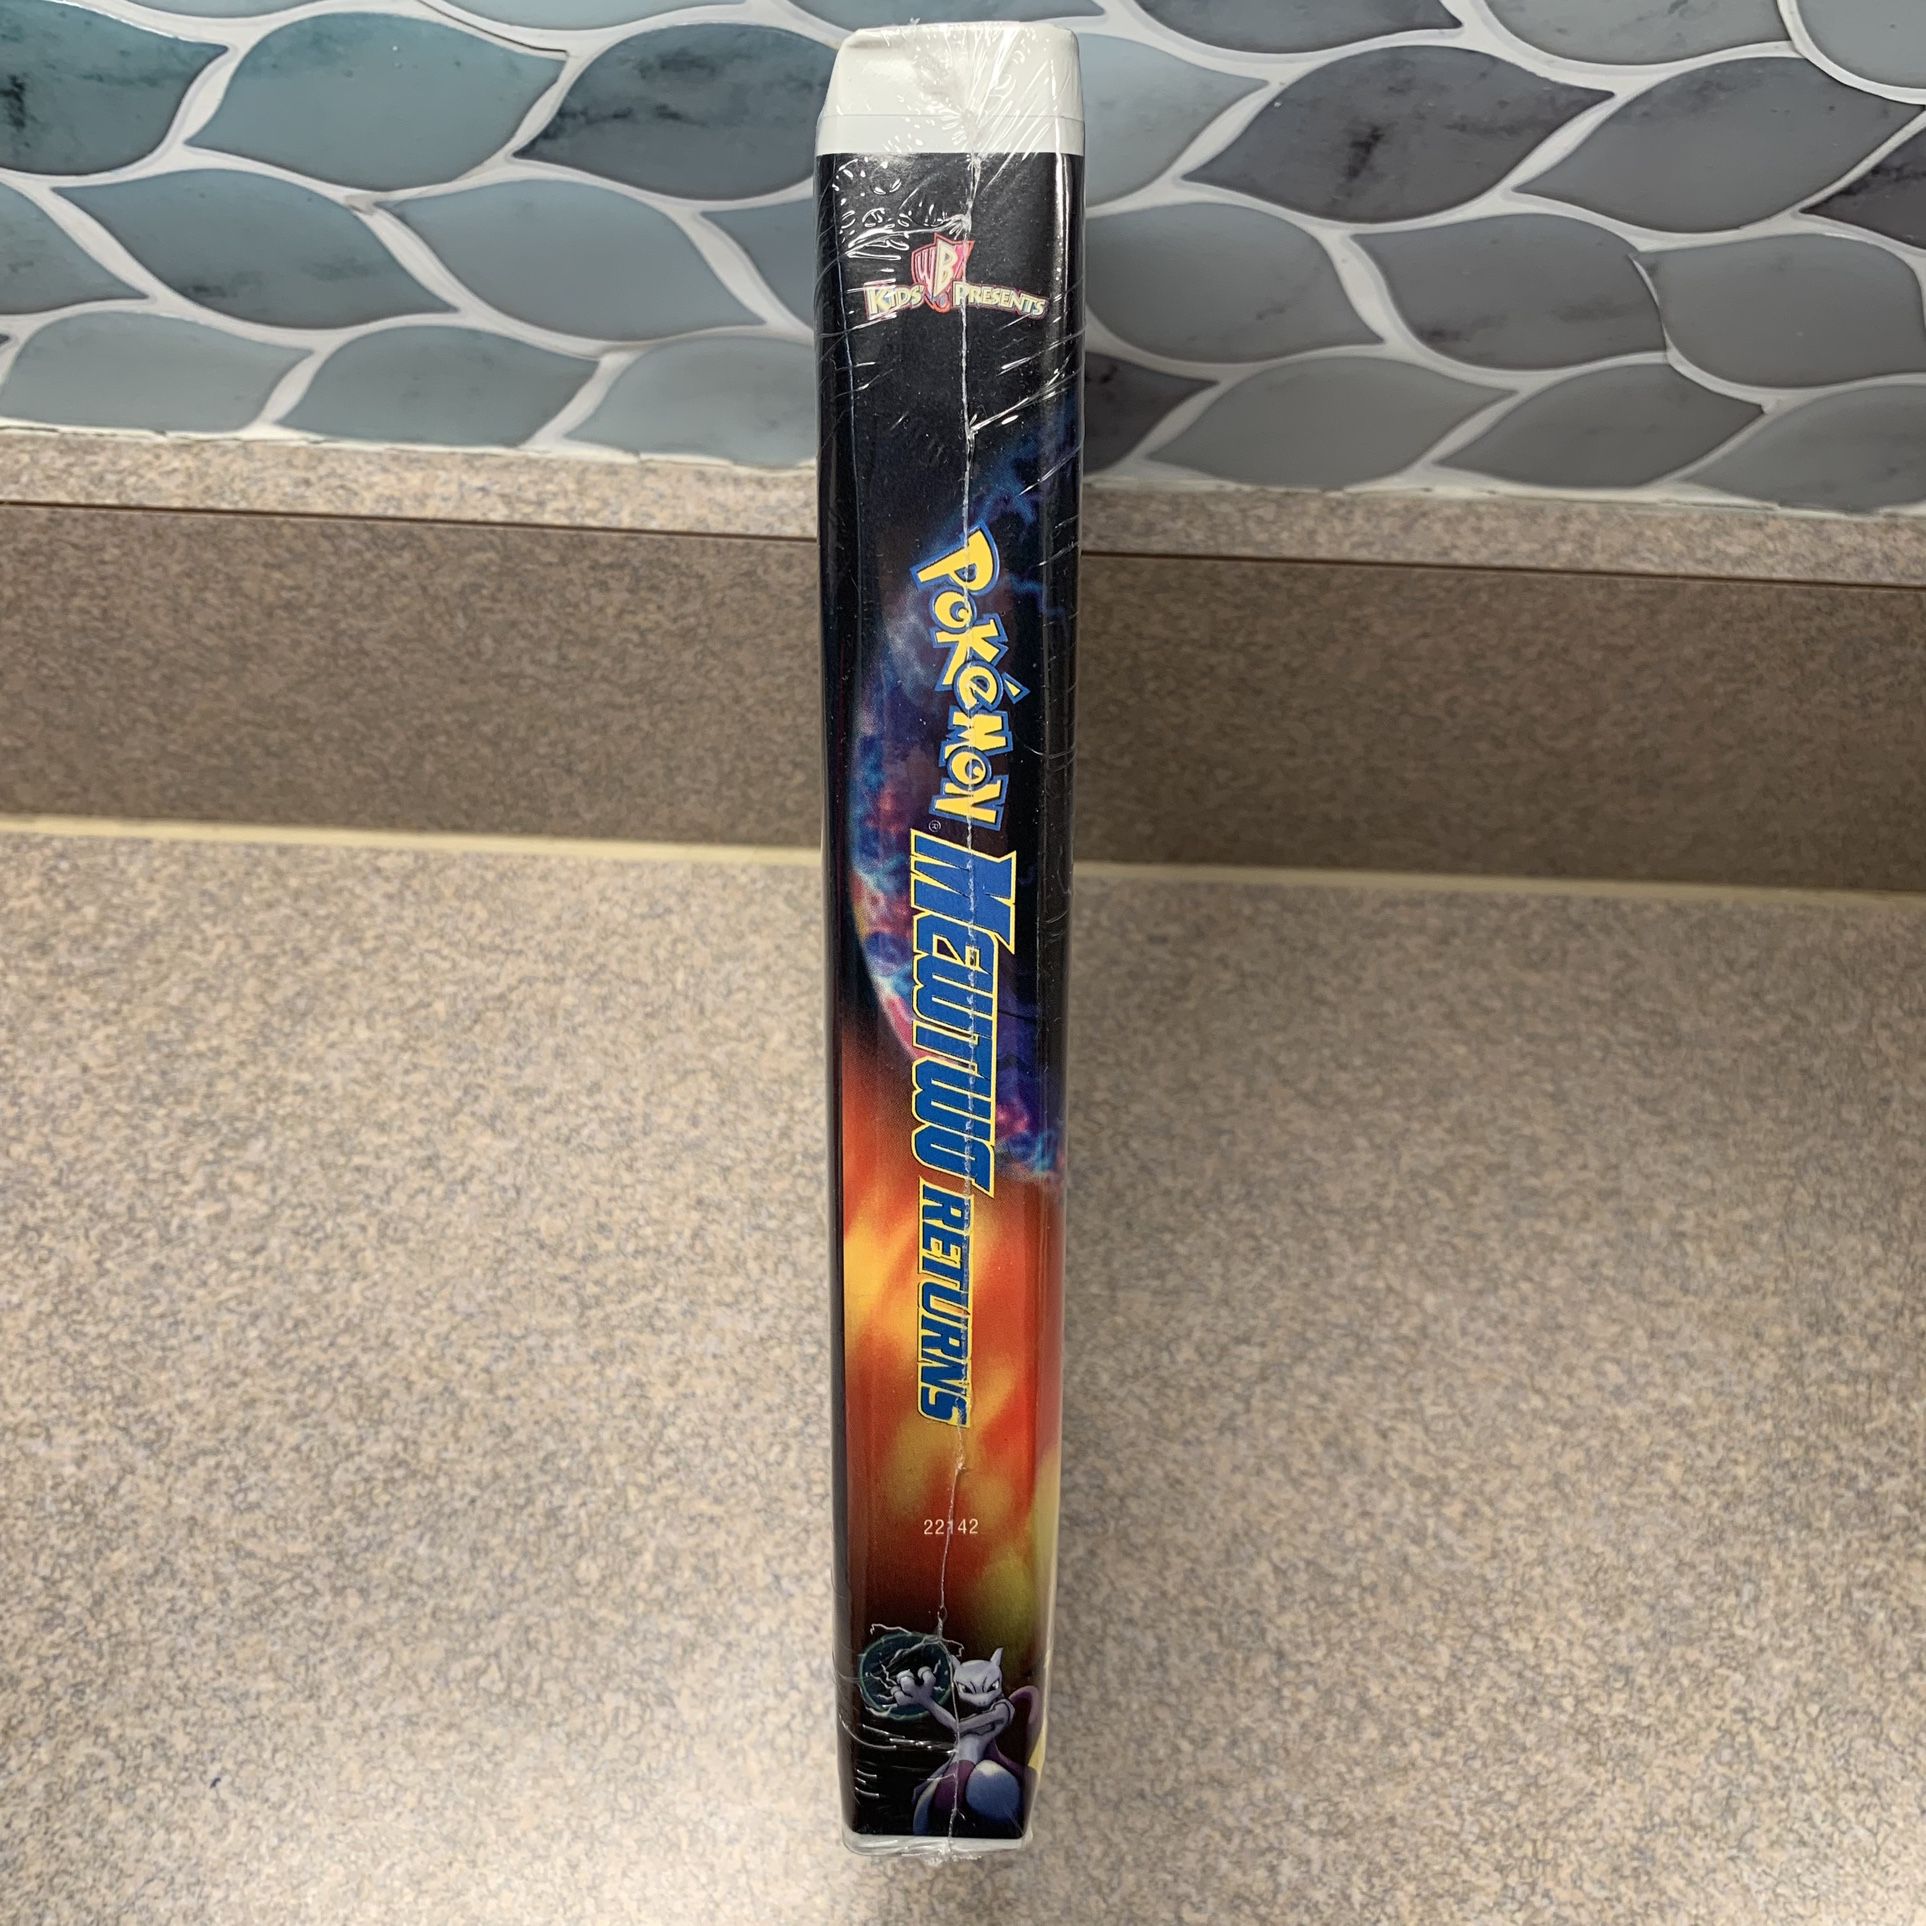 POKEMON - Mewtwo Returns (VHS, 2001, Warner, Clamshell) ~ New/Sealed  NoWatermark for Sale in Taylor, MI - OfferUp